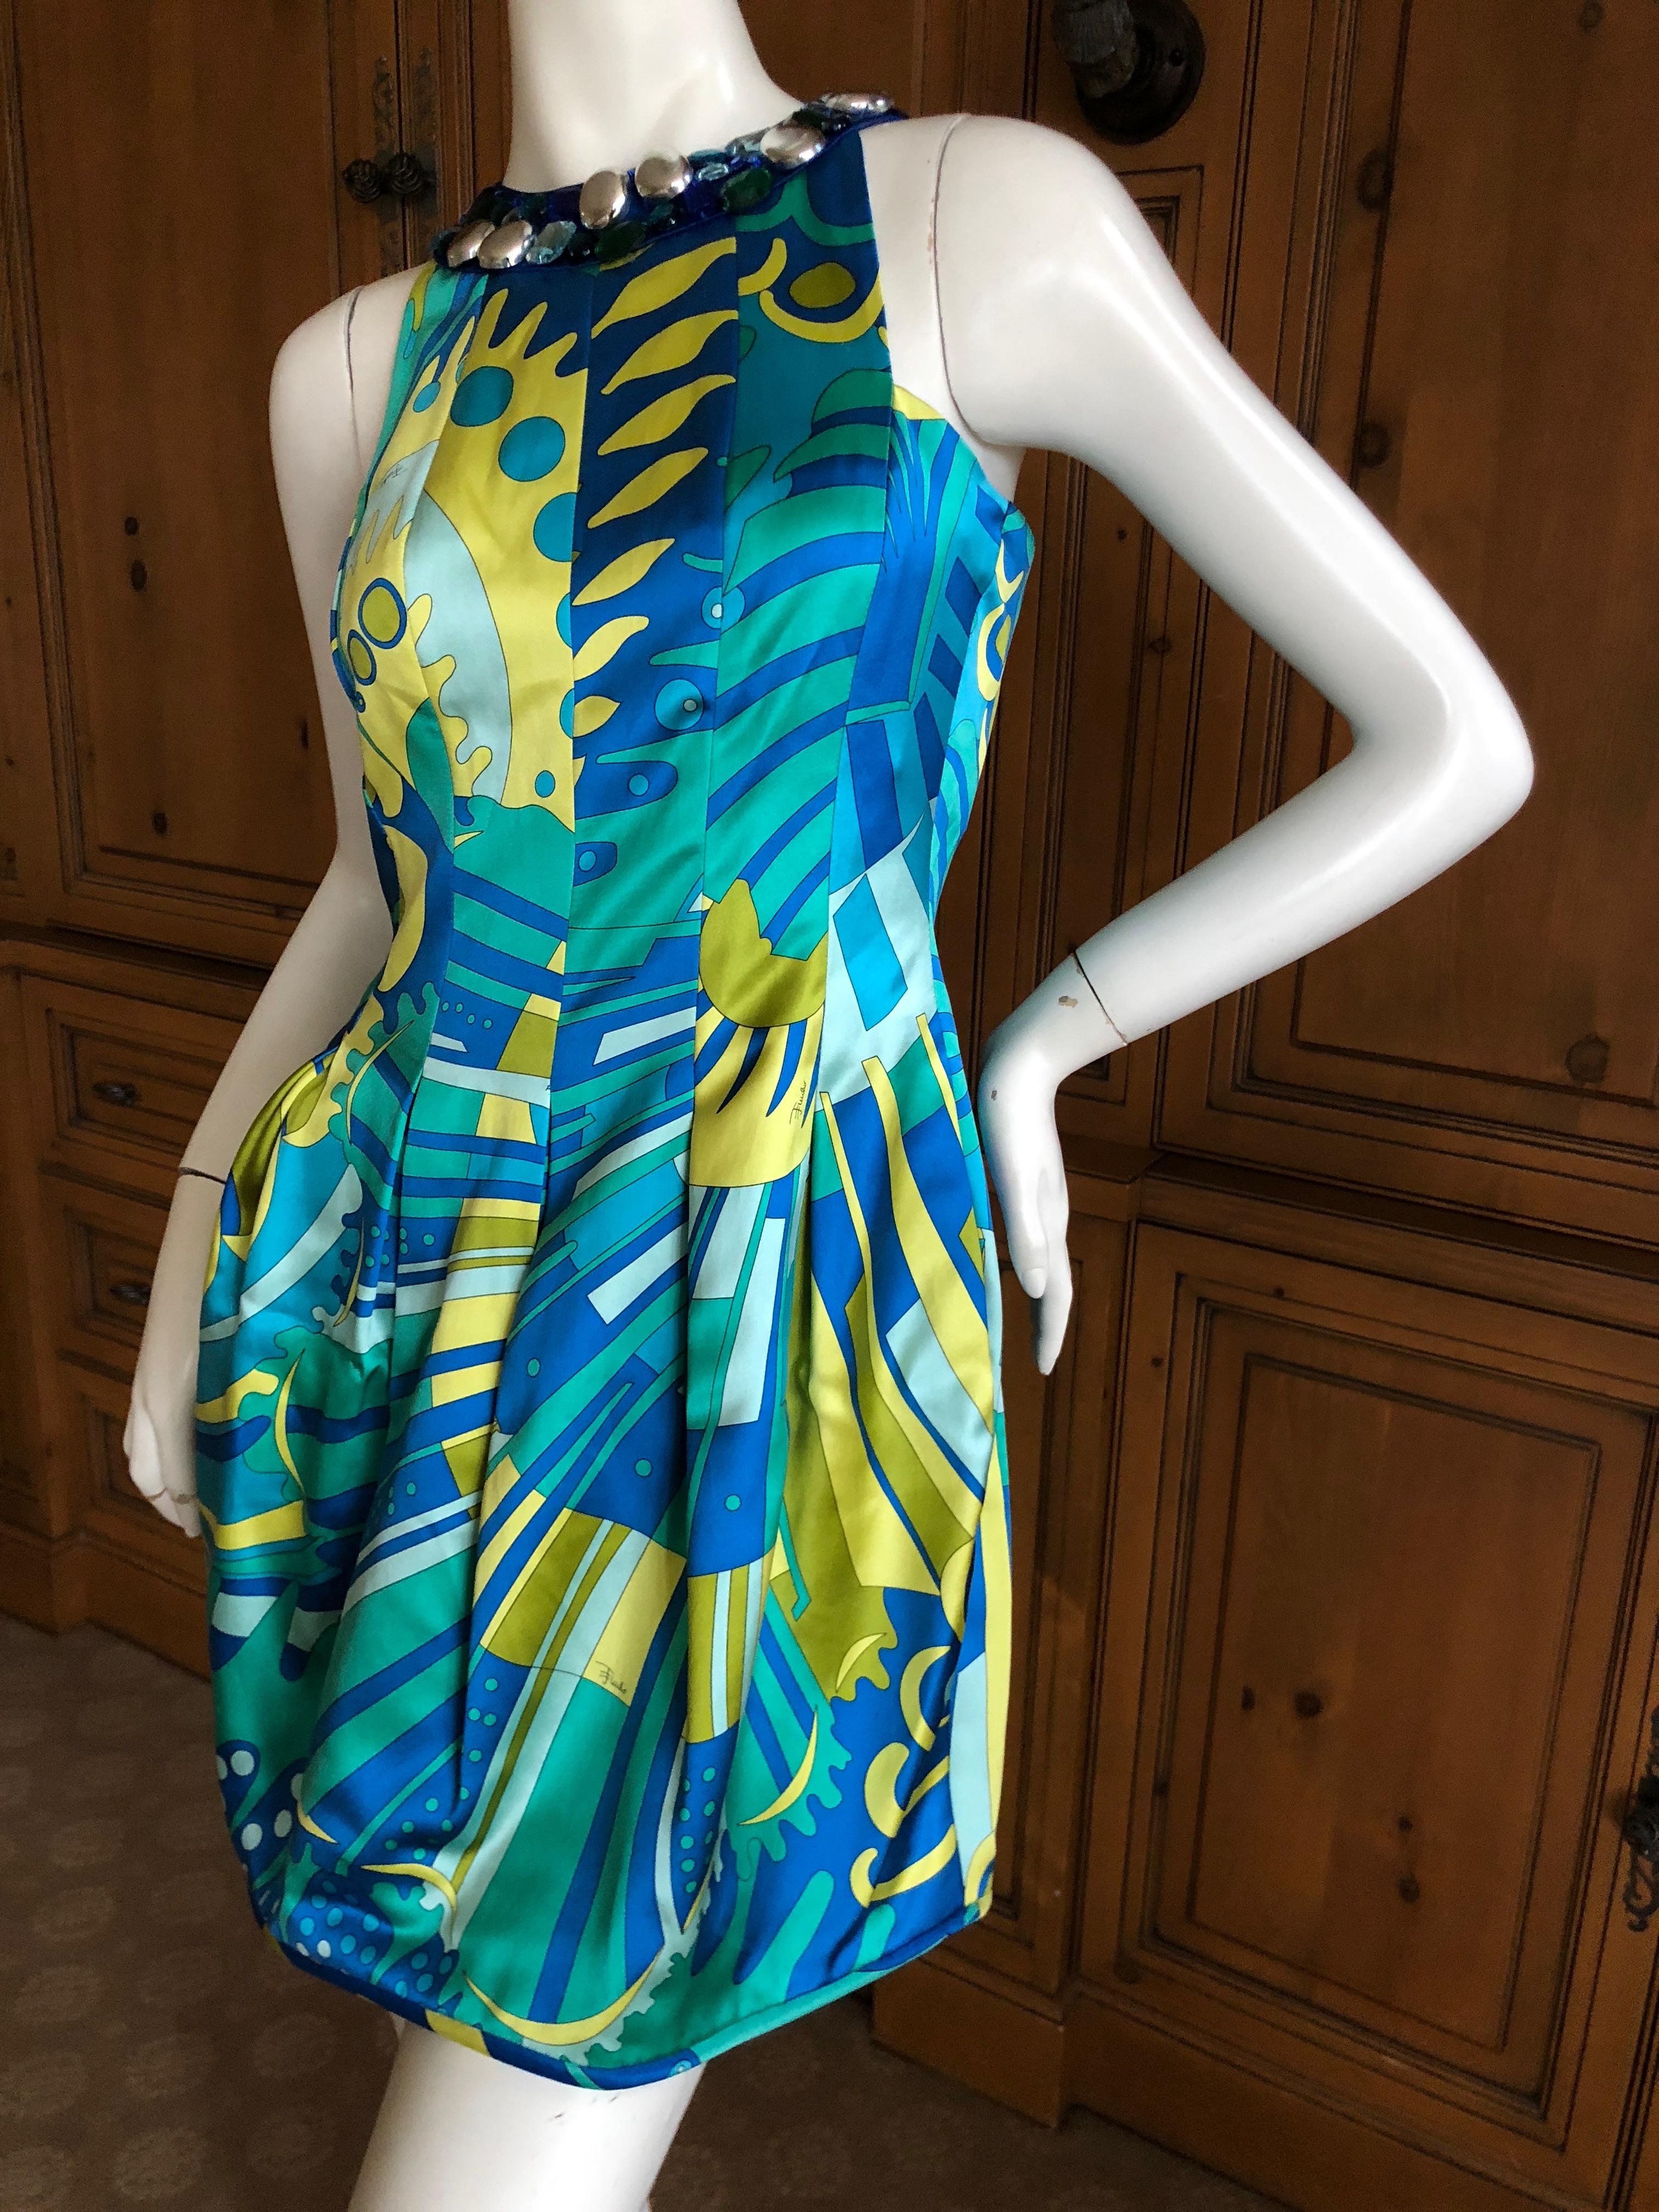 Emilio Pucci Embellished Polished Silk Cotton Mini Dress Size 6 In Excellent Condition For Sale In Cloverdale, CA